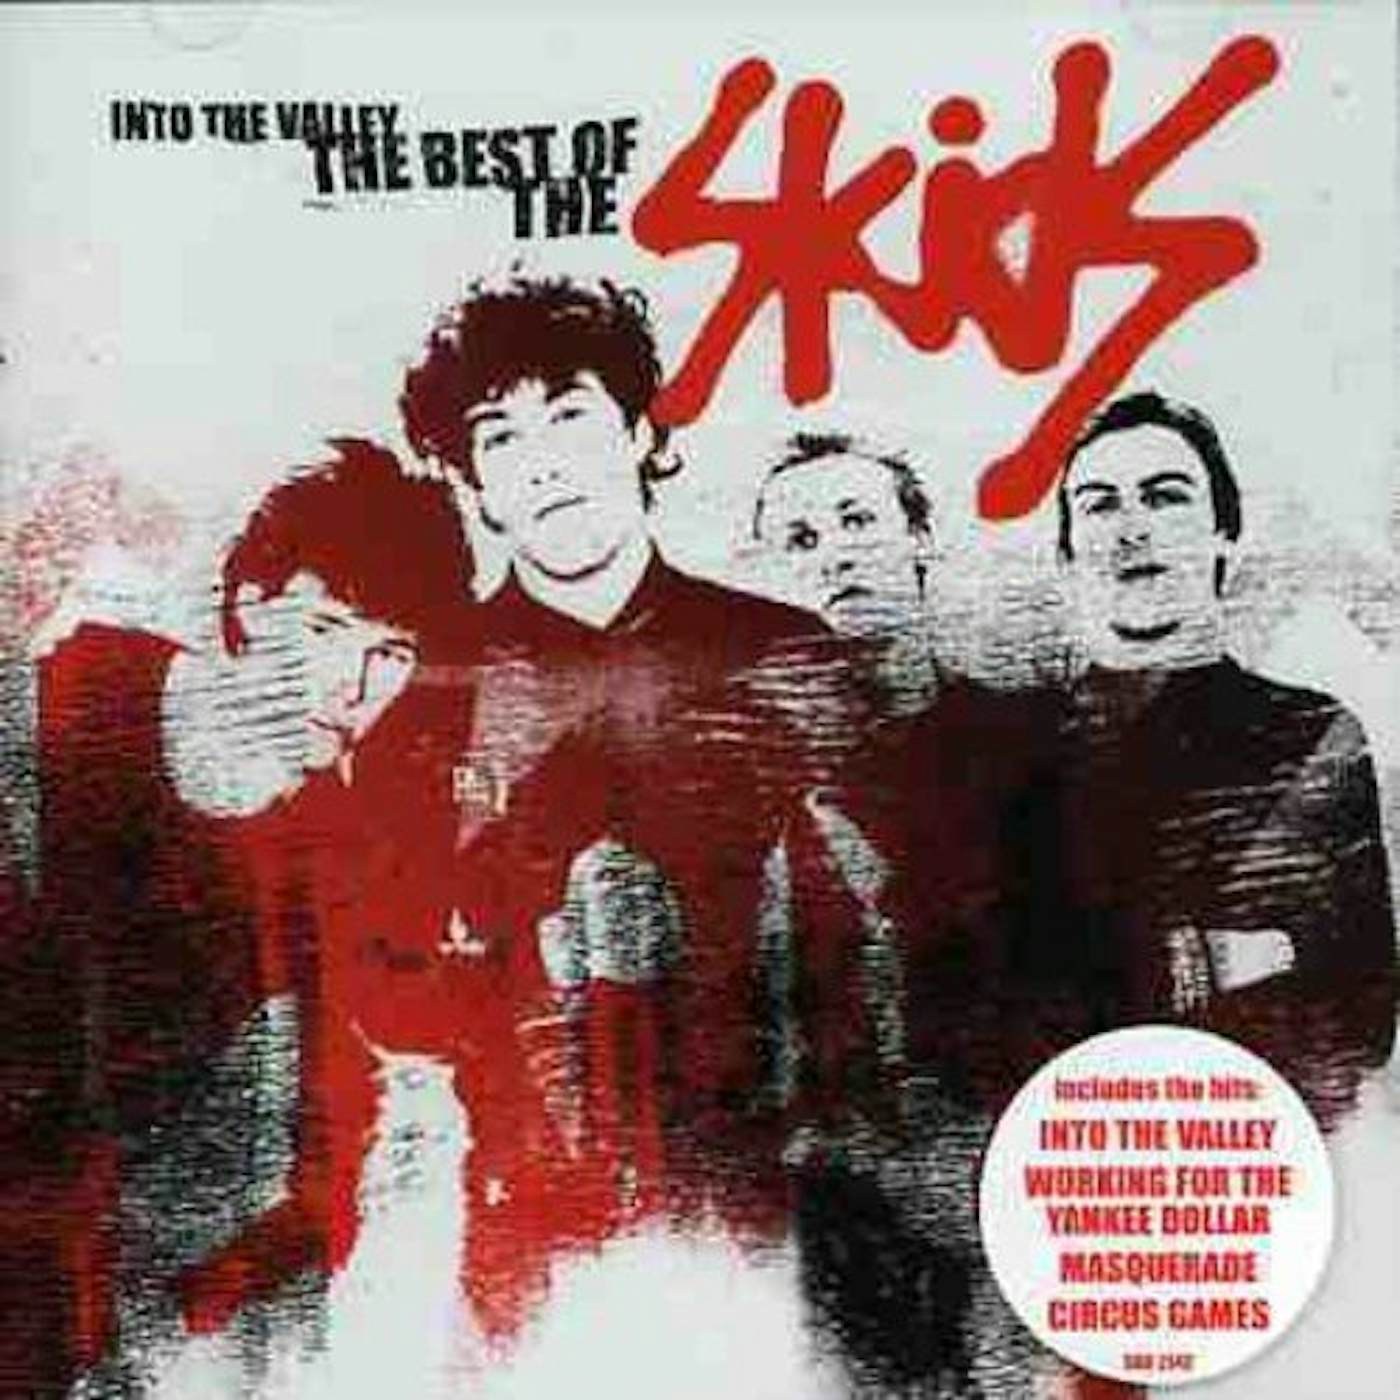 BEST OF THE SKIDS CD